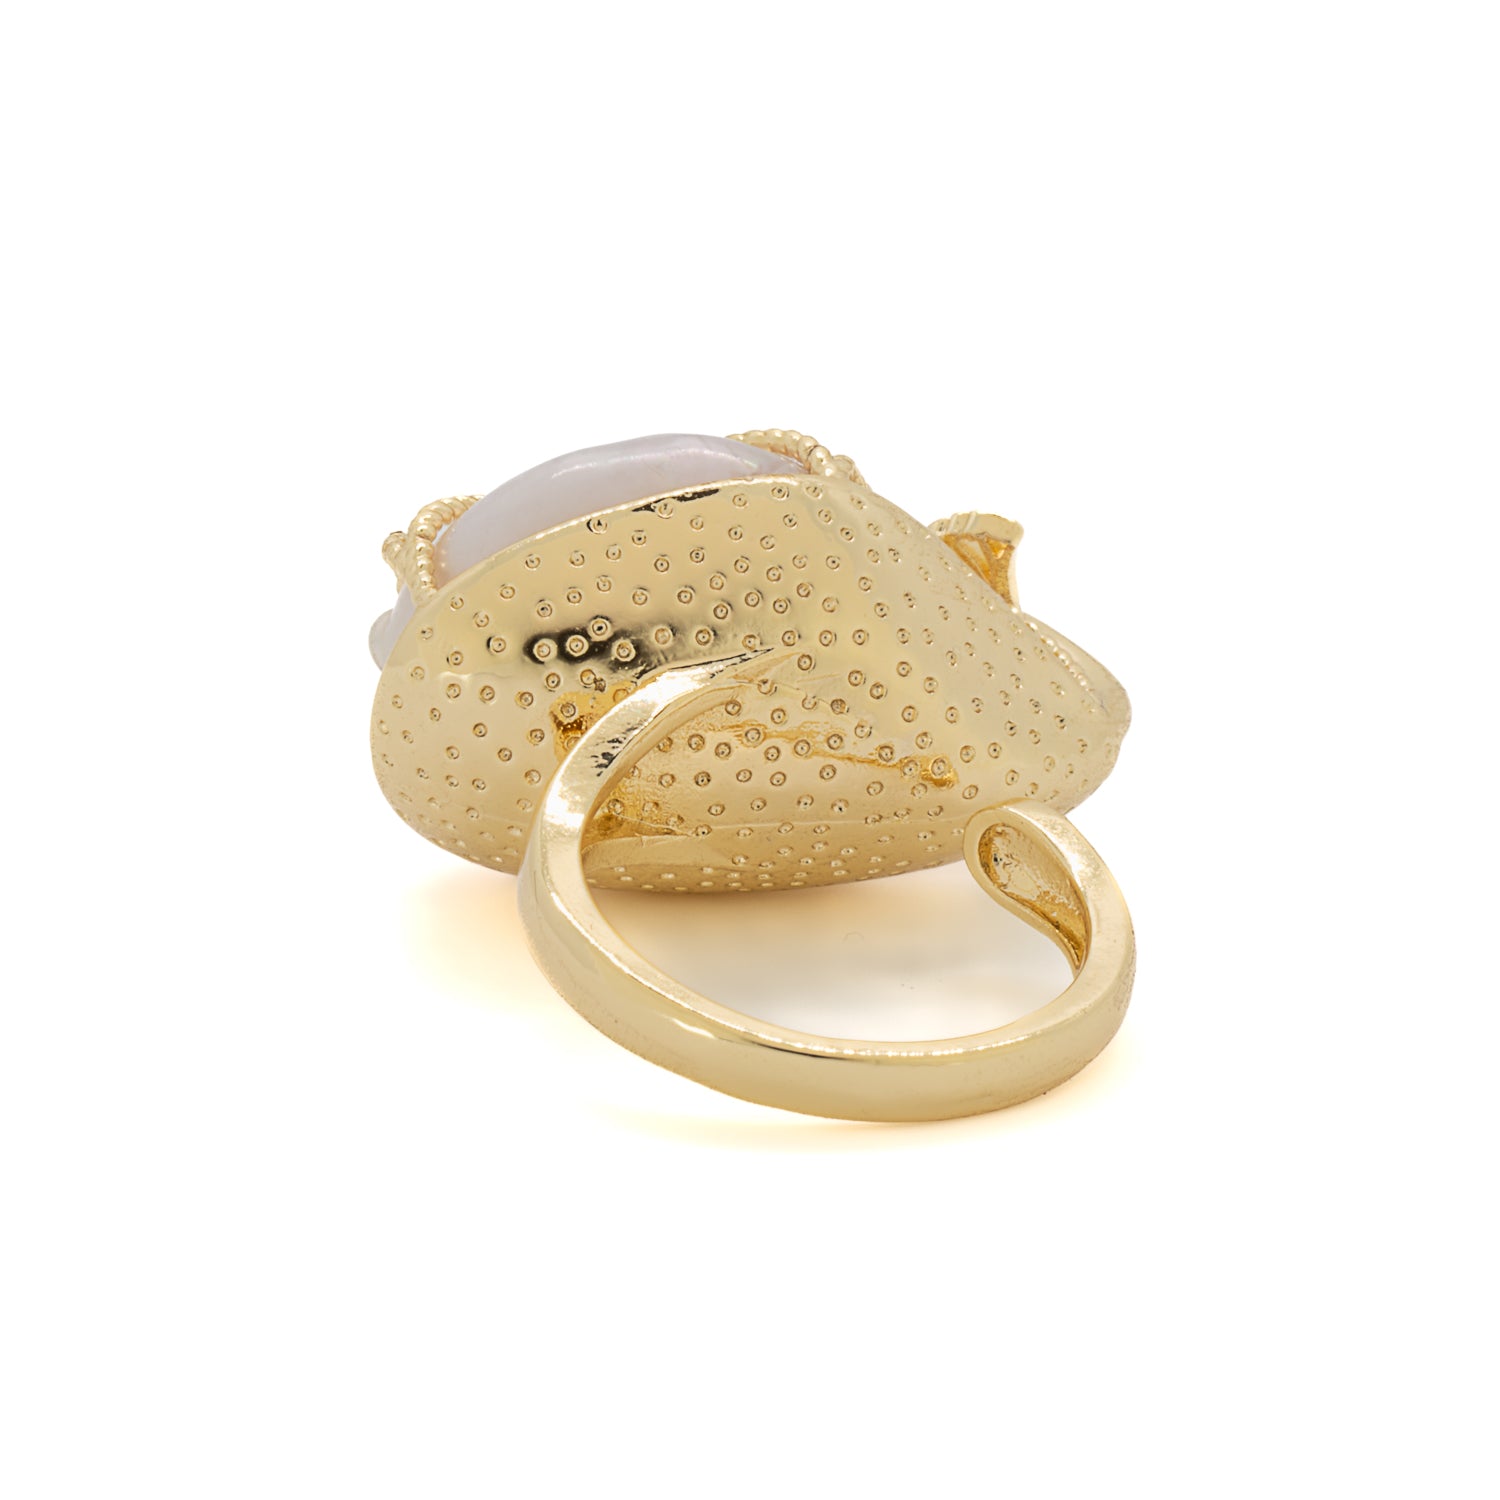 Radiate Opulence: Cleopatra Pearl & Gold Handcrafted Ring